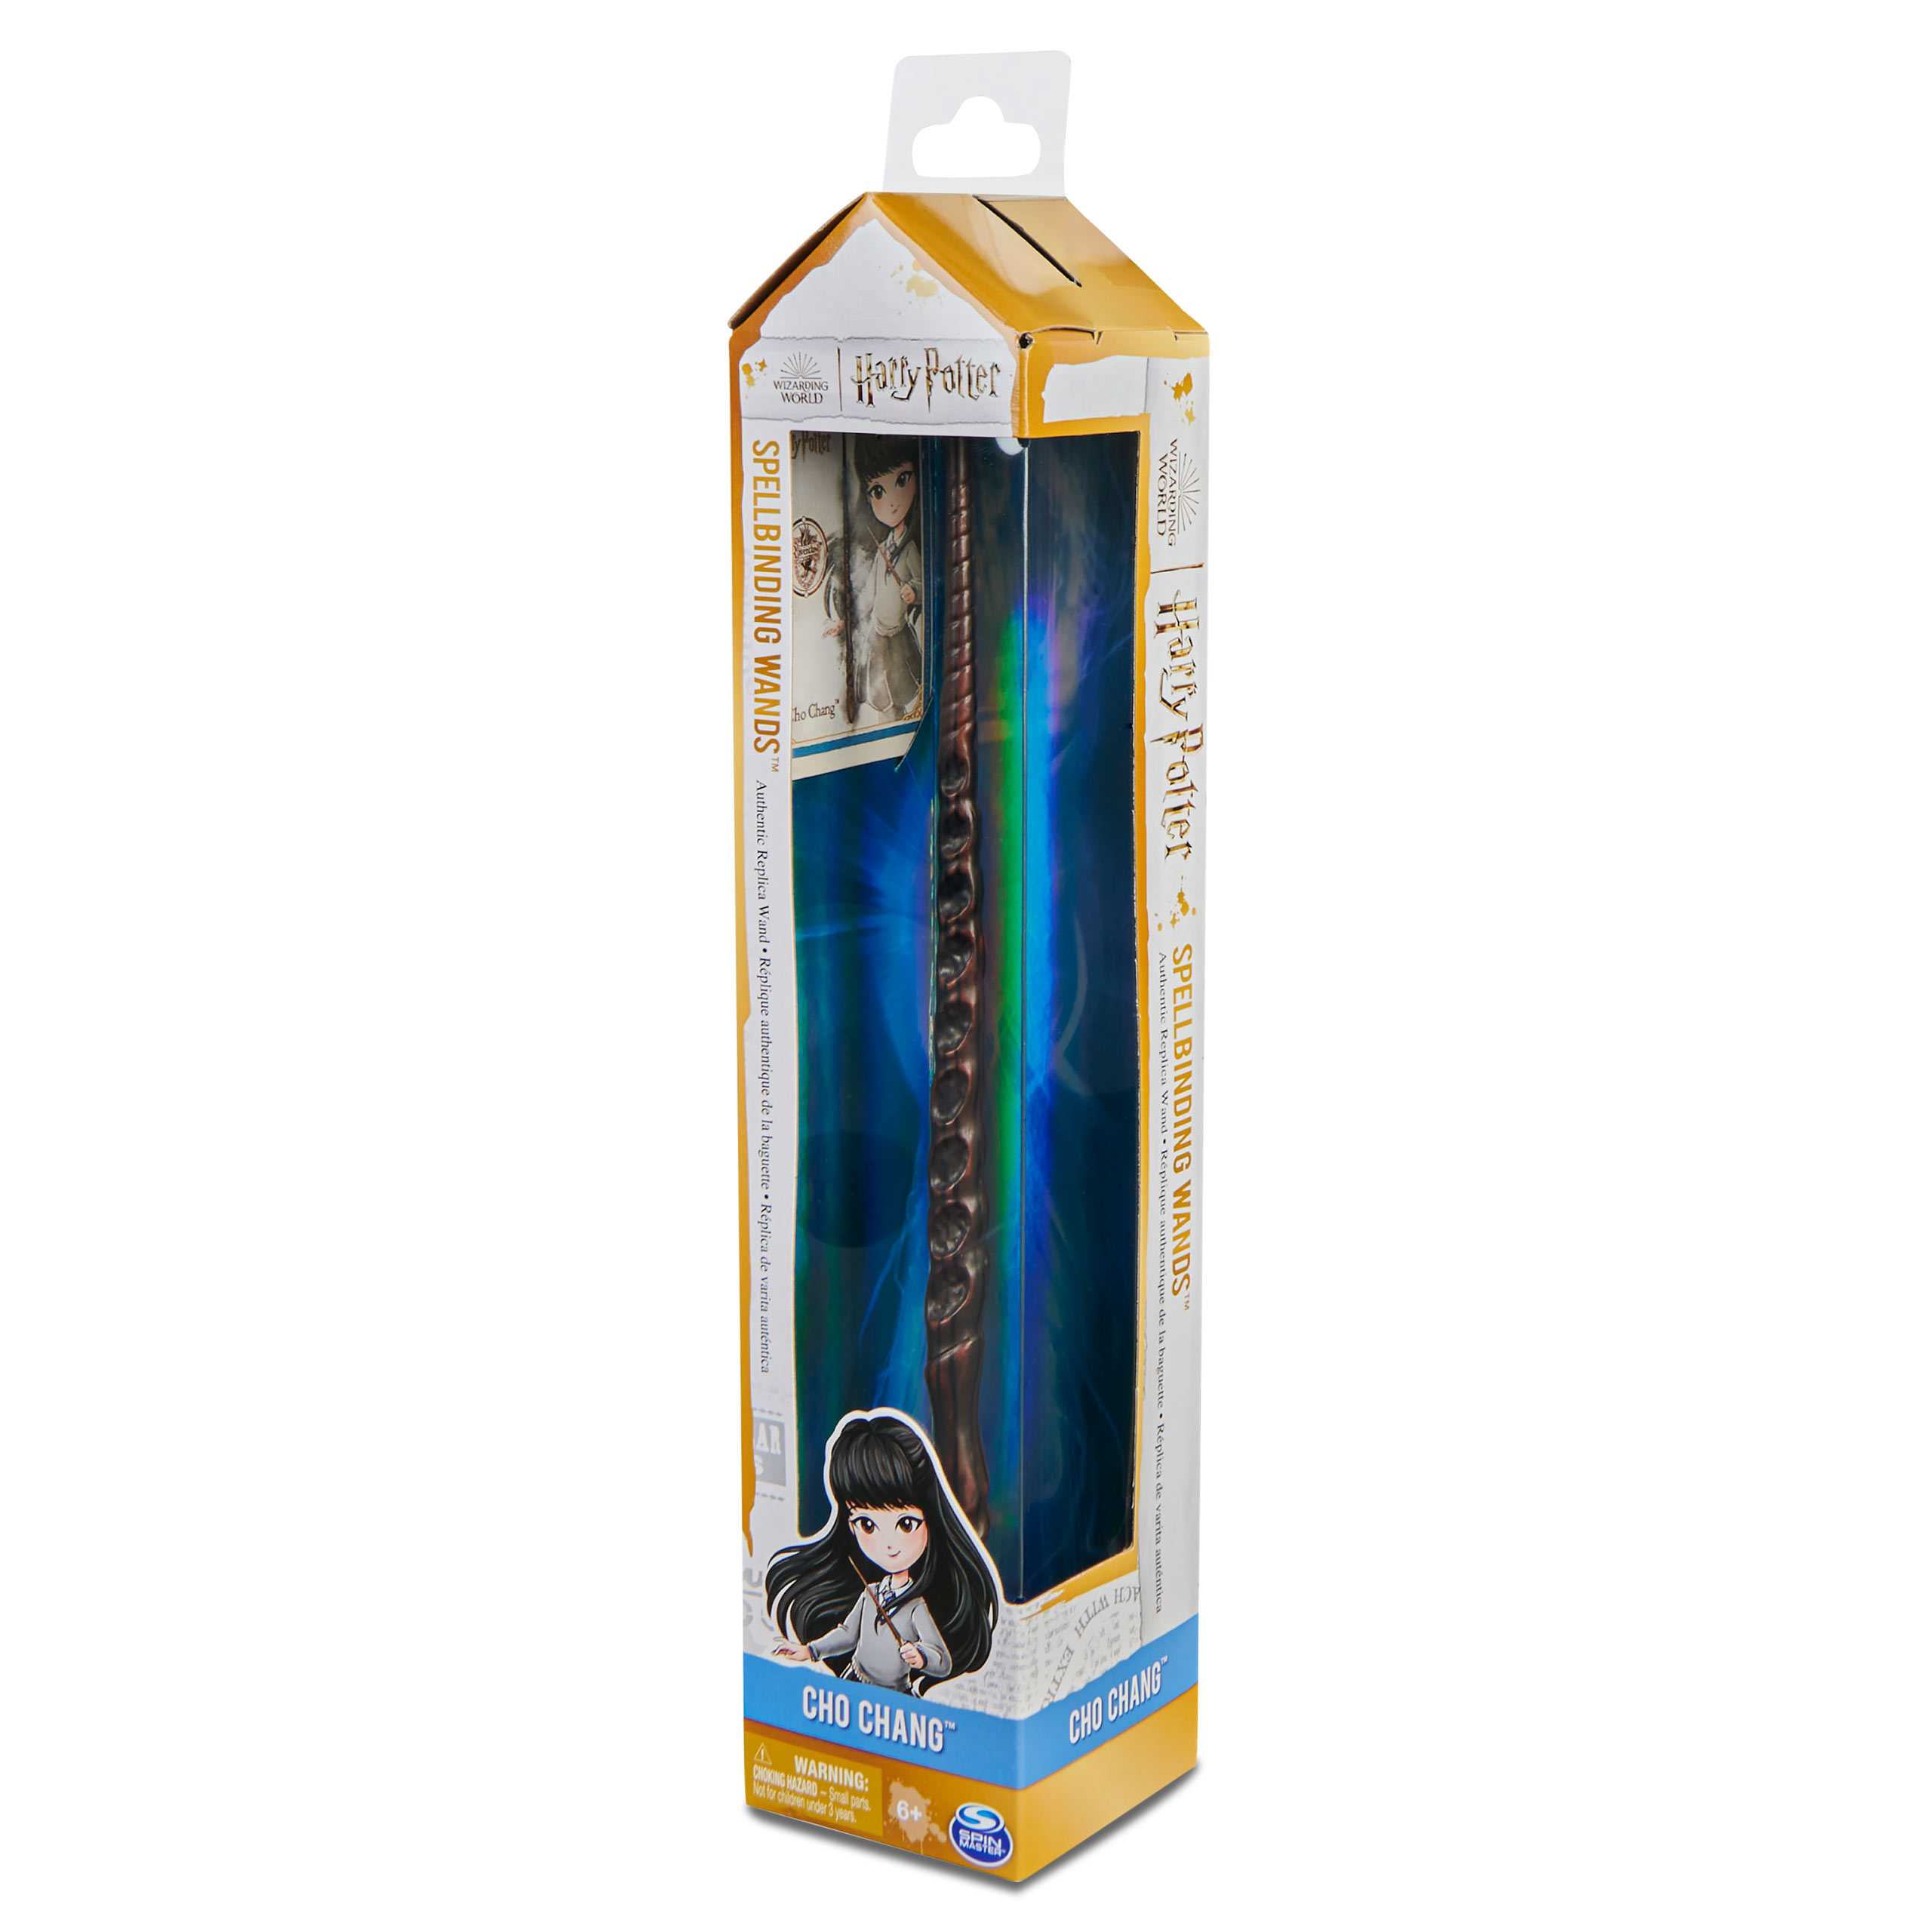 Harry Potter - Cho Chang Wand with Spell Card